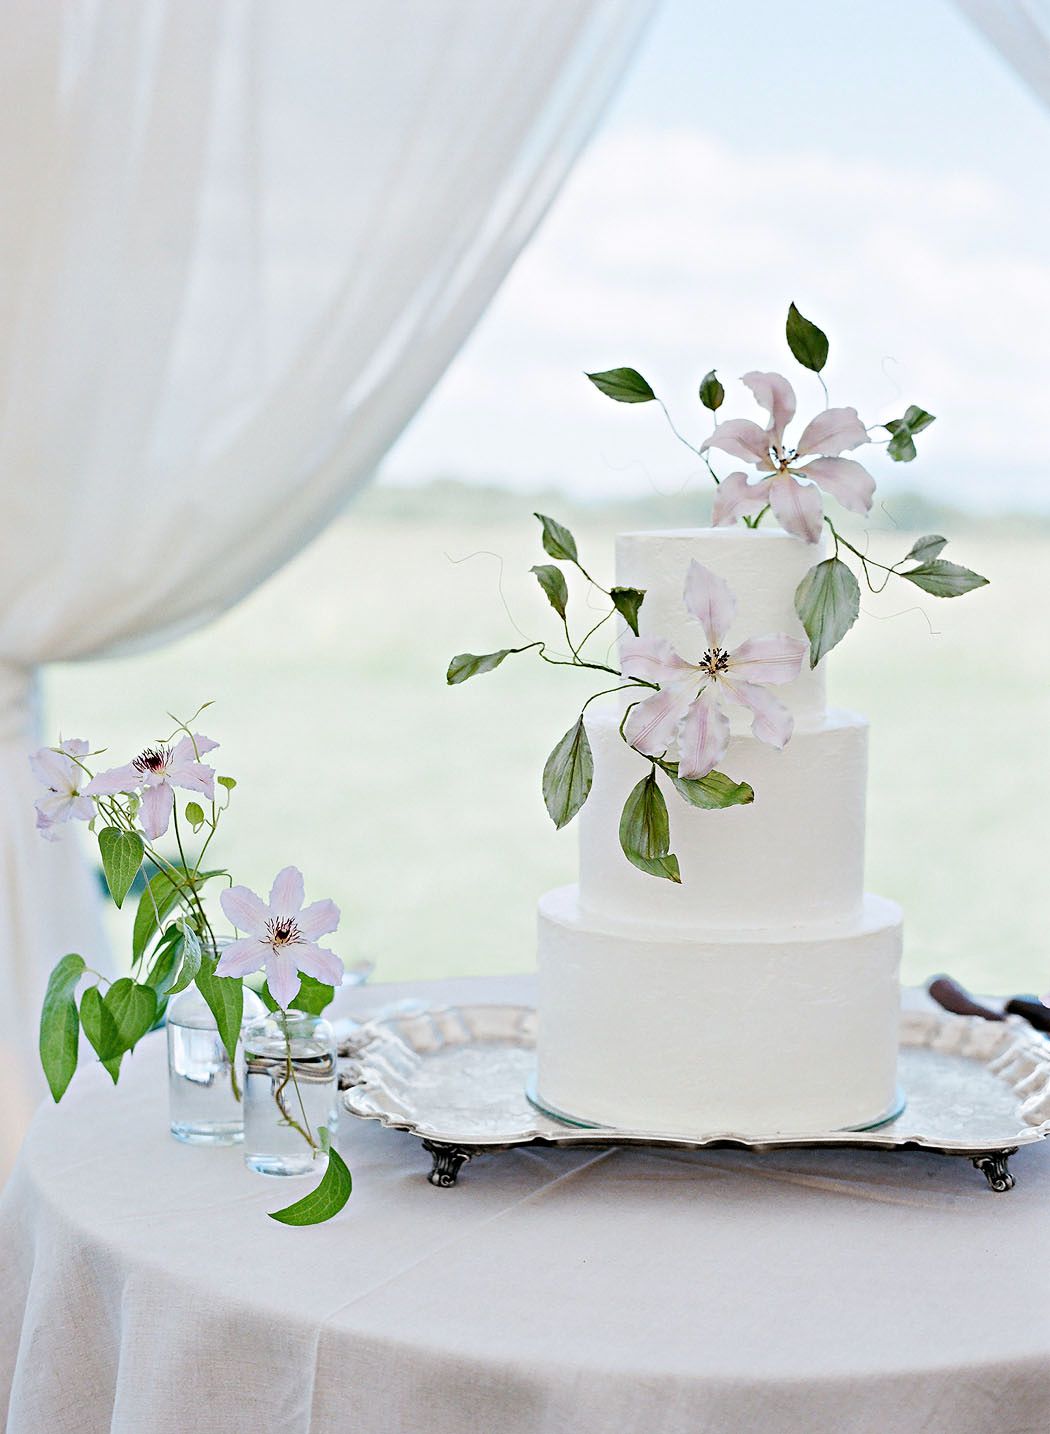 white cake with flowers